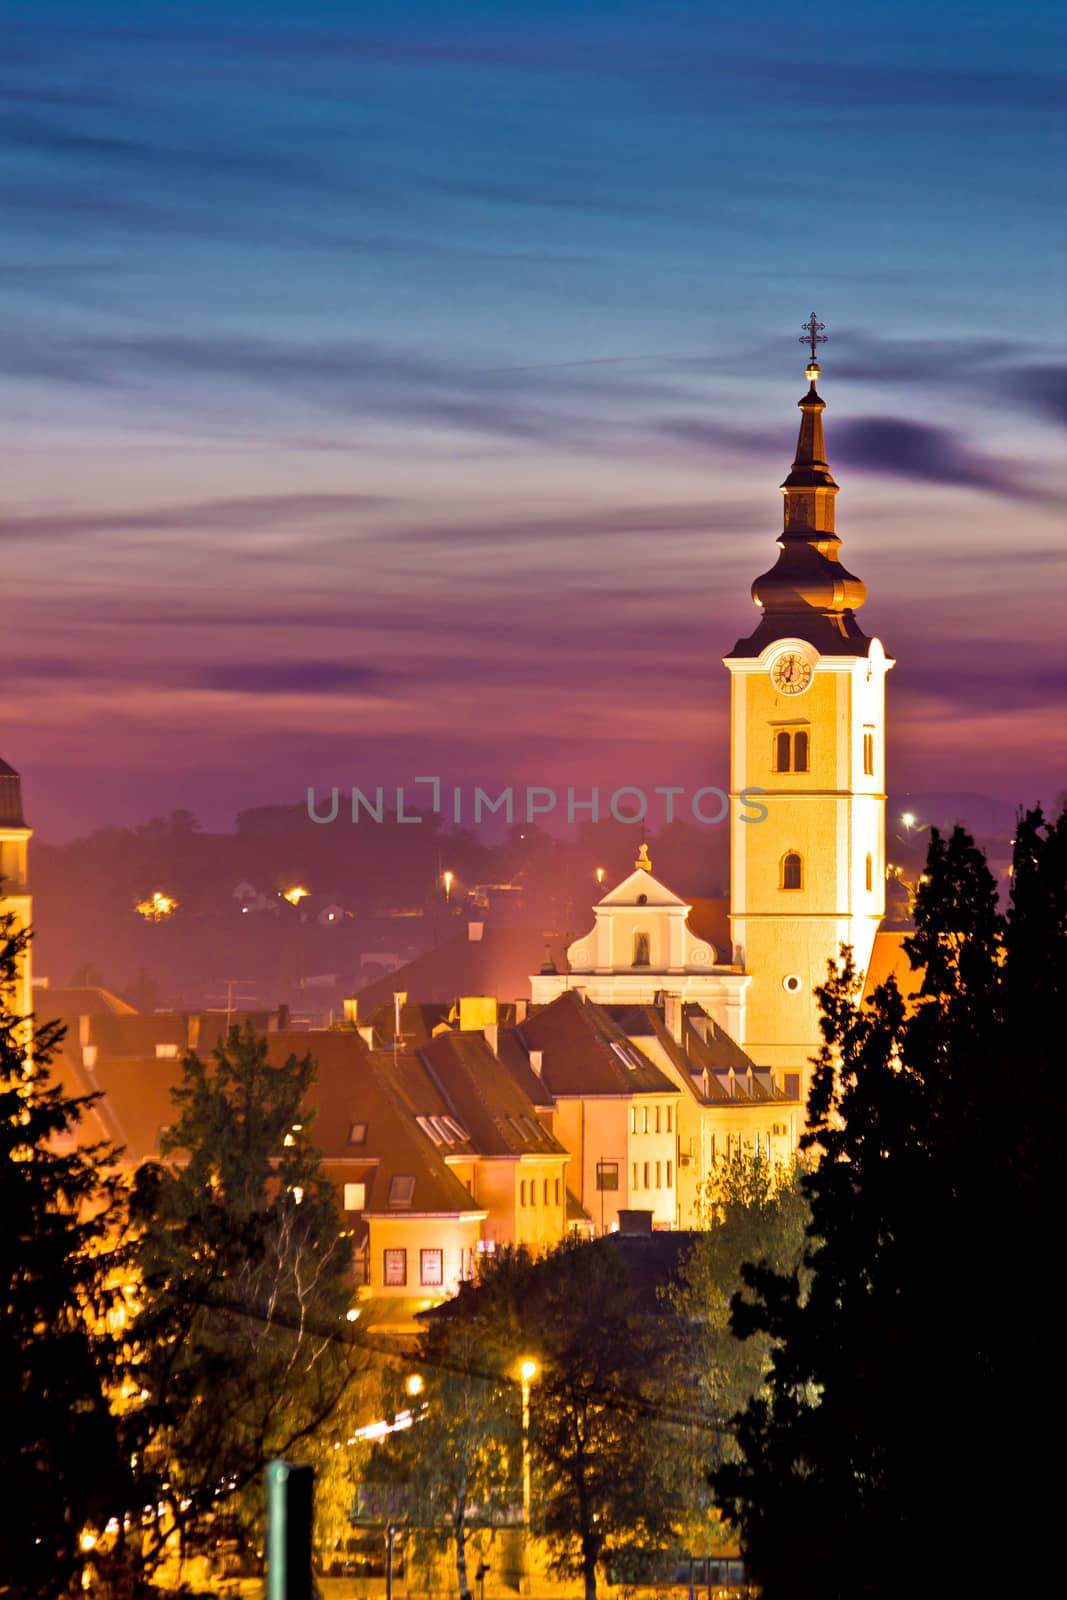 Church tower in colorful dusk by xbrchx